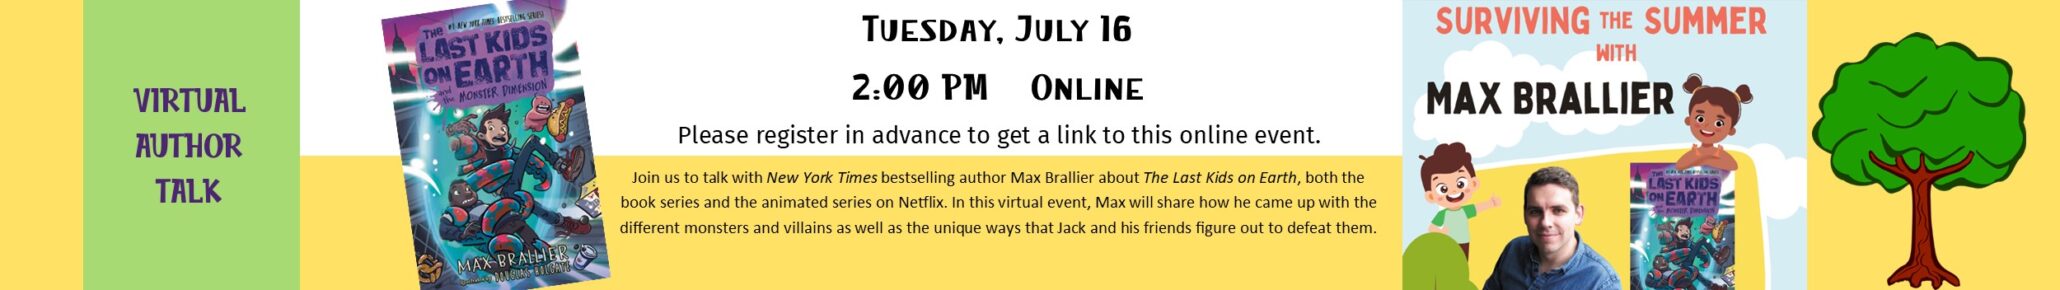 author max brallier live online july 16